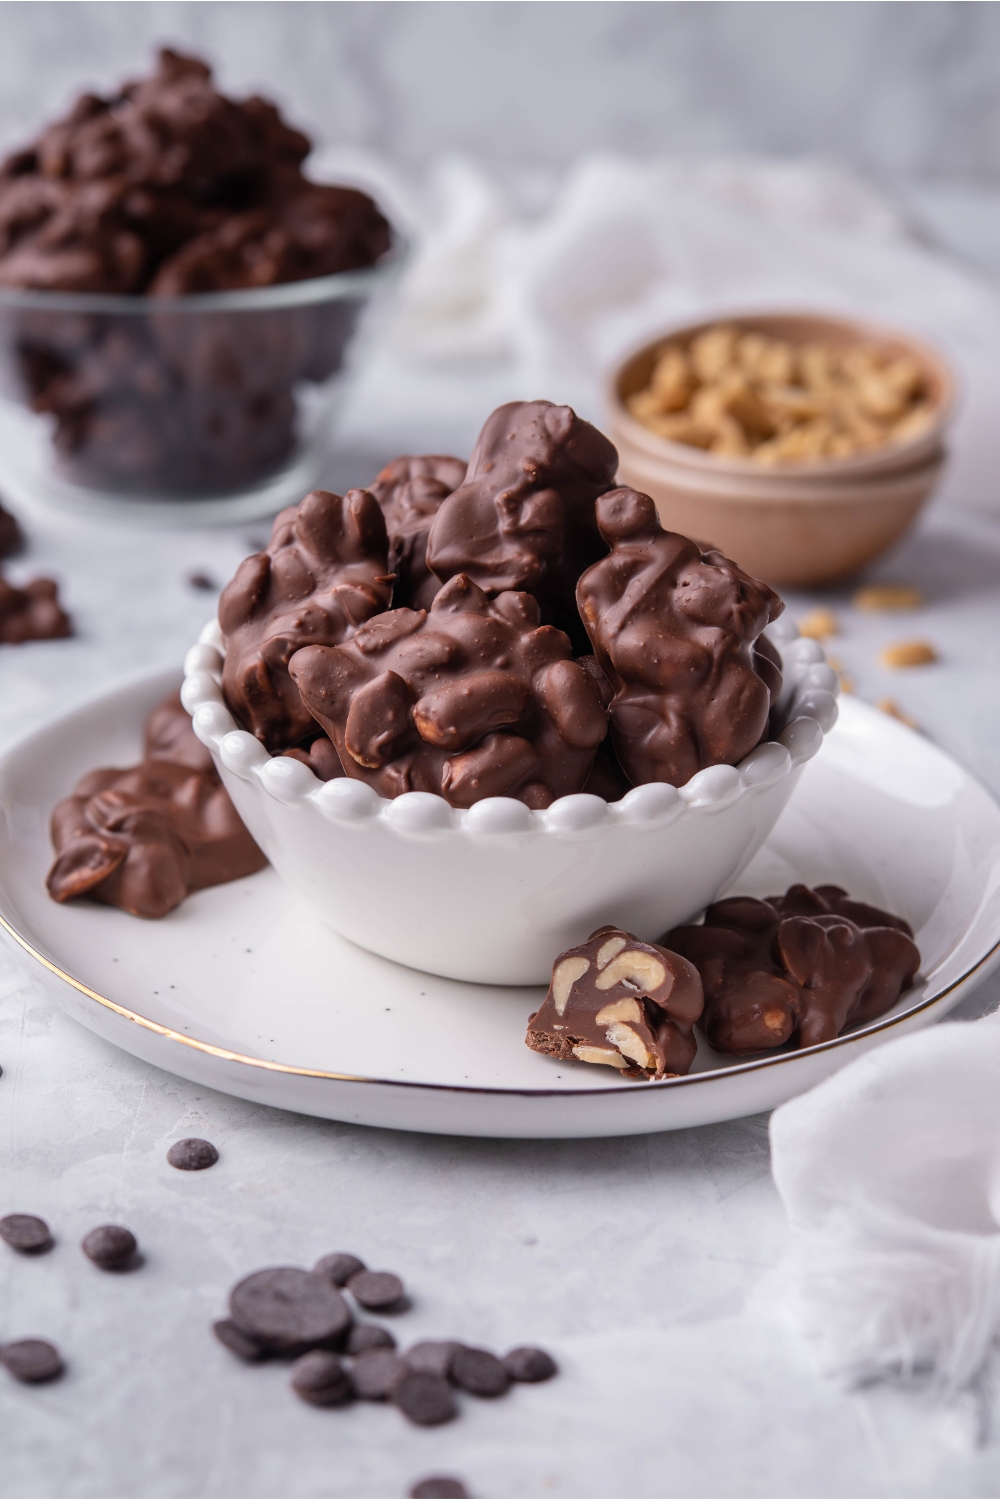 Crock pot chocolate peanut clusters piled in a white serving bowl with some pieces spilling out on the plate below. In the background is another bowl of peanut clusters and a bowl of peanuts.